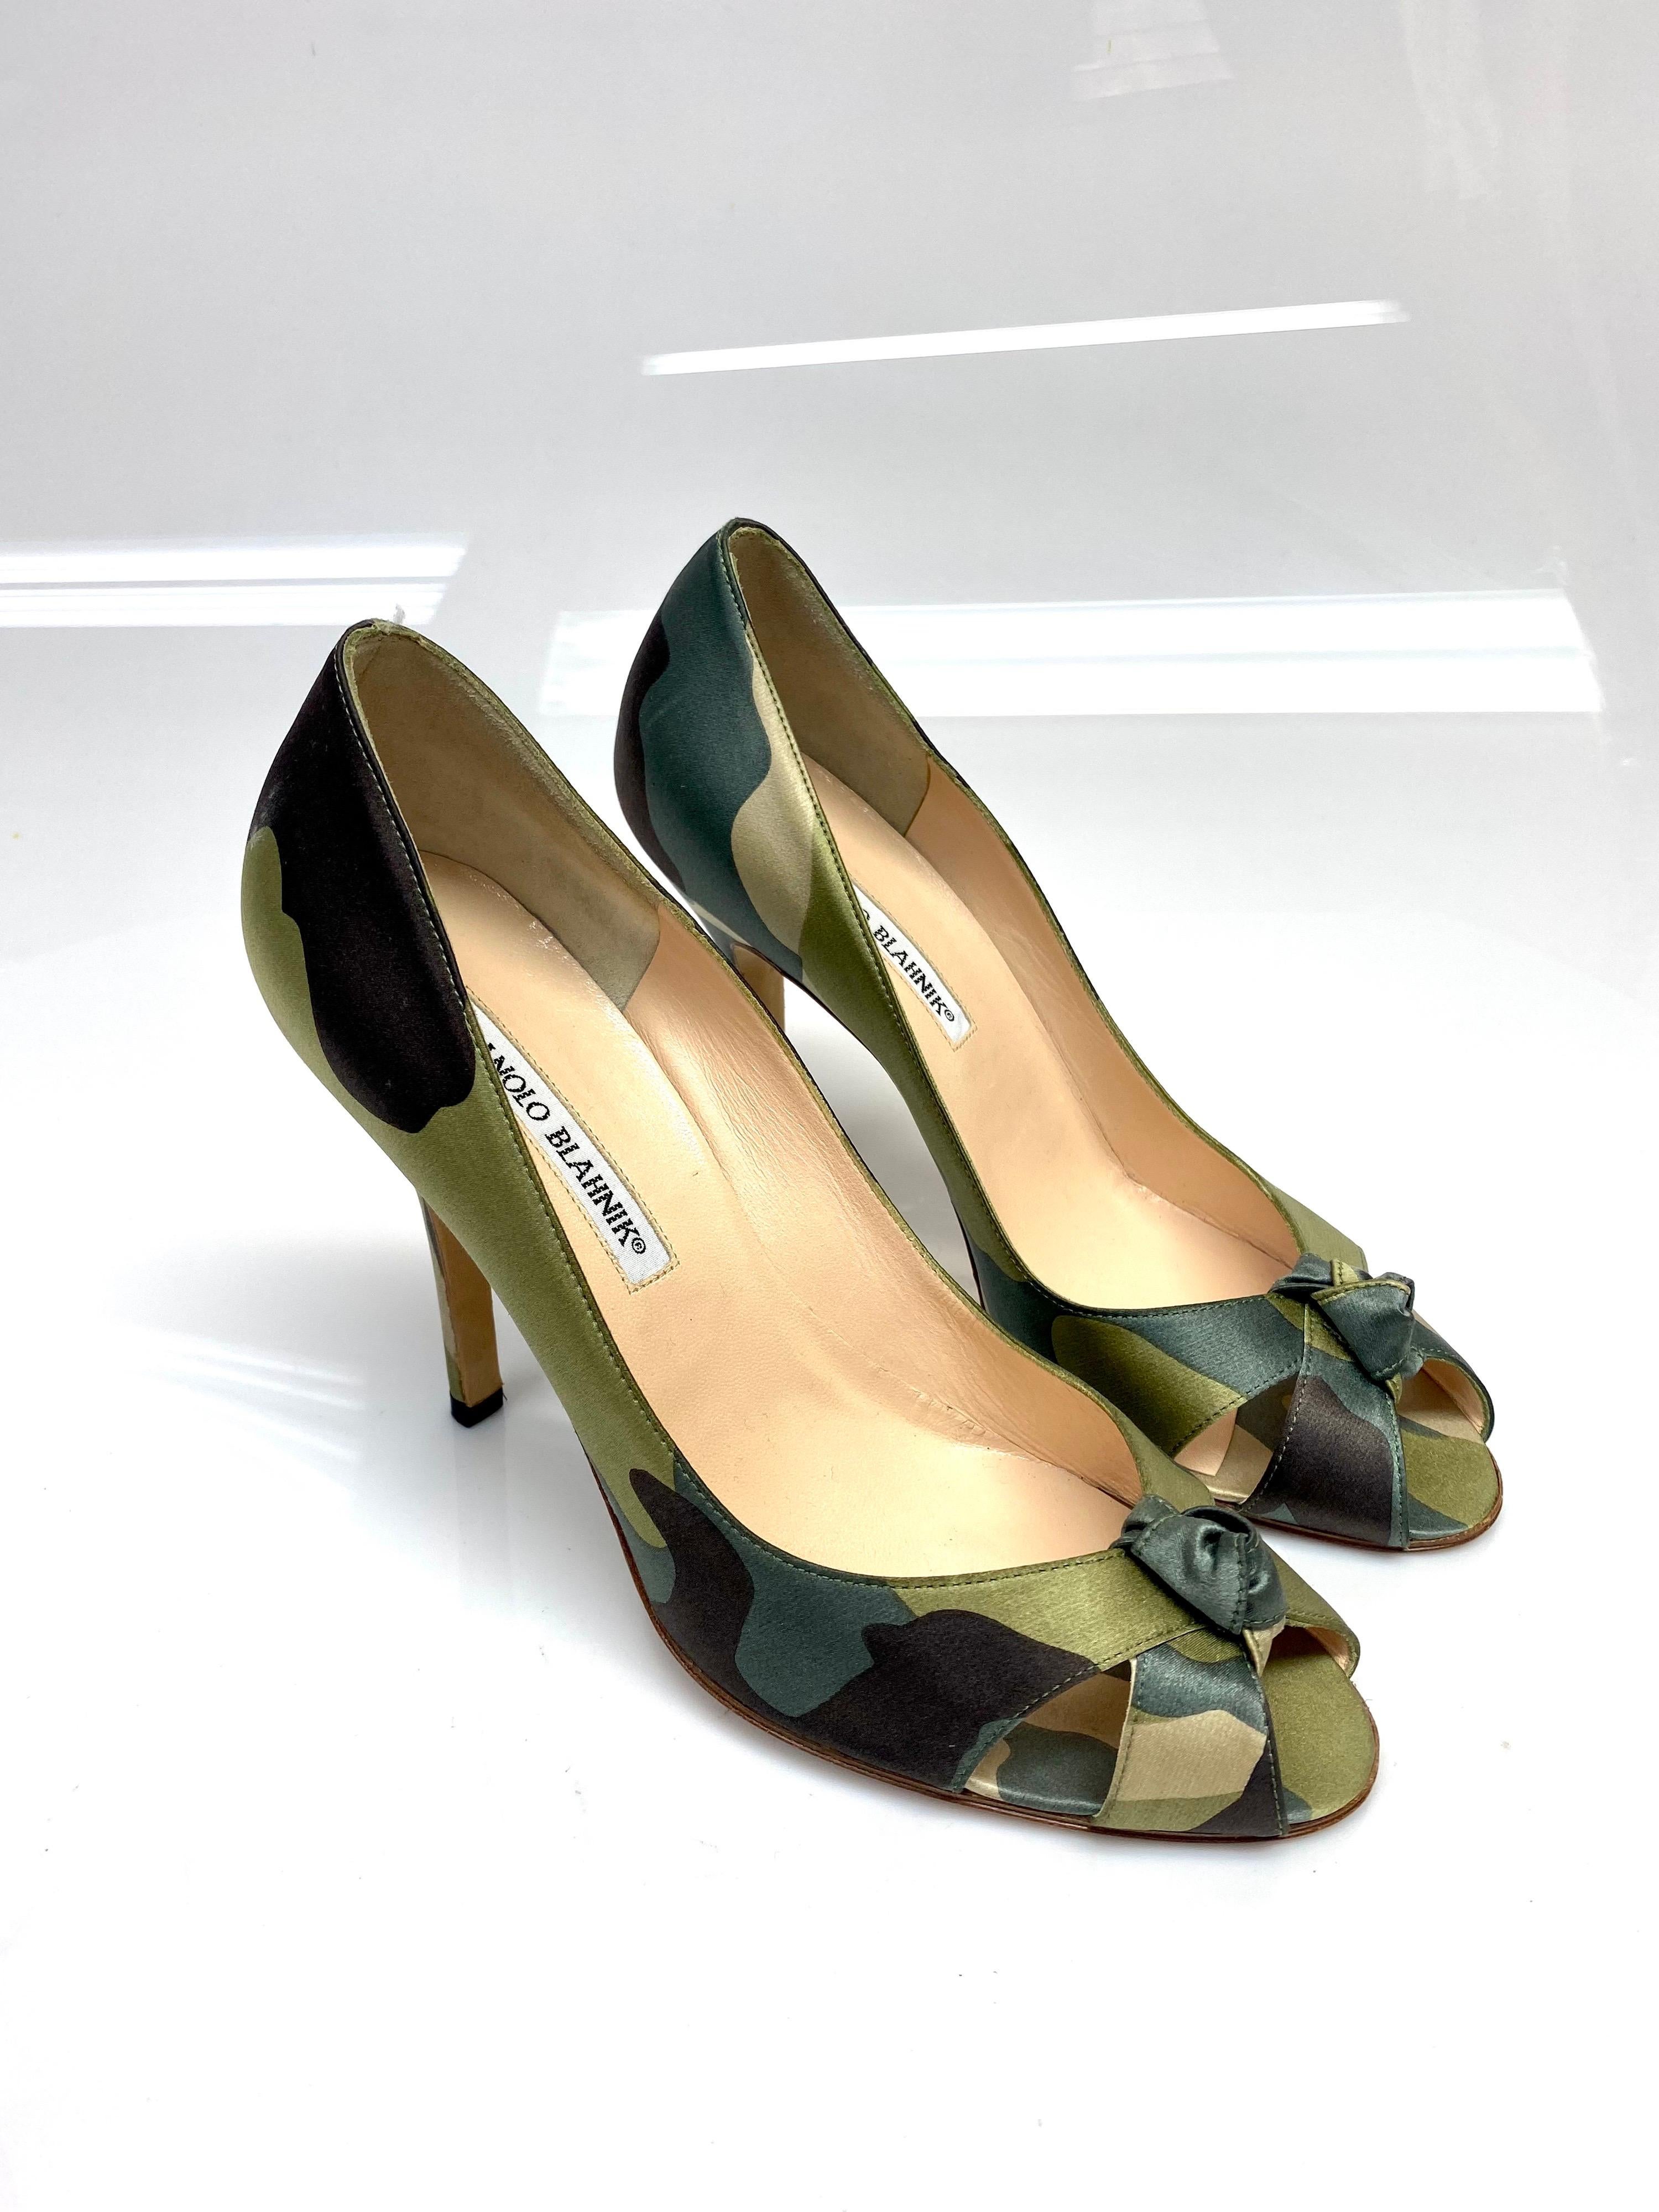 Manolo Blahnik Camouflage Silk Peep Toe Heels Size 38.5. These silk camouflage Manolo Blahnik's are fashions forward with a statement. Featuring a camouflage silk print, peep toe front with a knotted detail. Item is in good condition with some minor